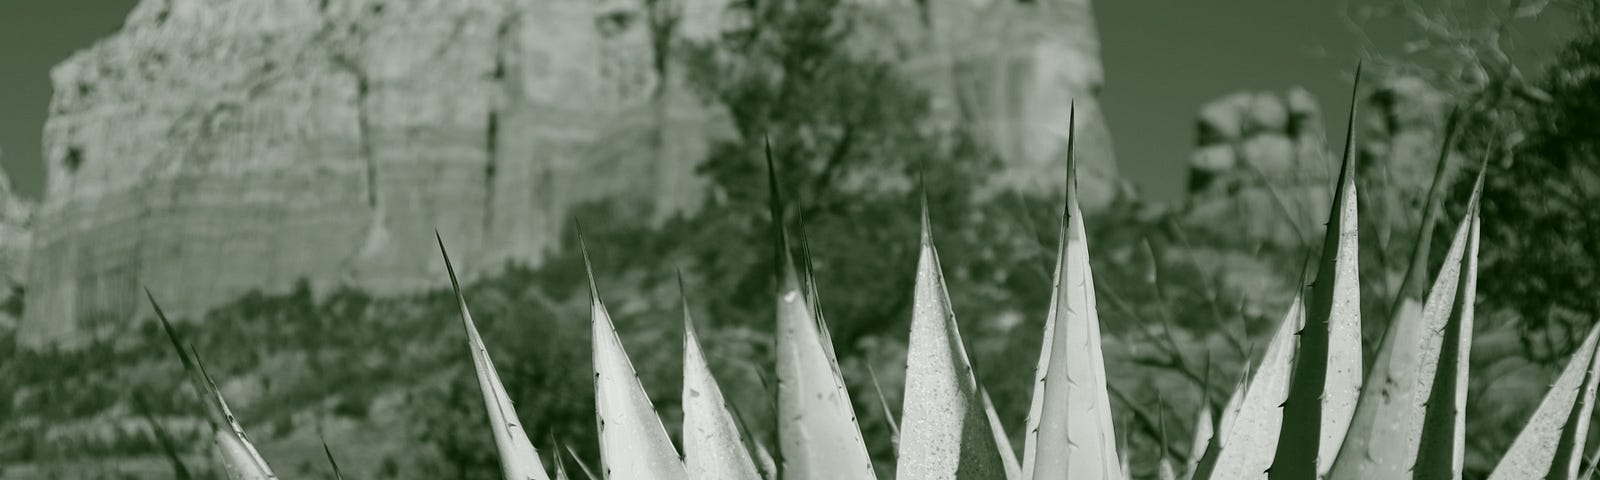 Spiky leaves of an agave in the foreground, in the background a sandstone butte in the desert